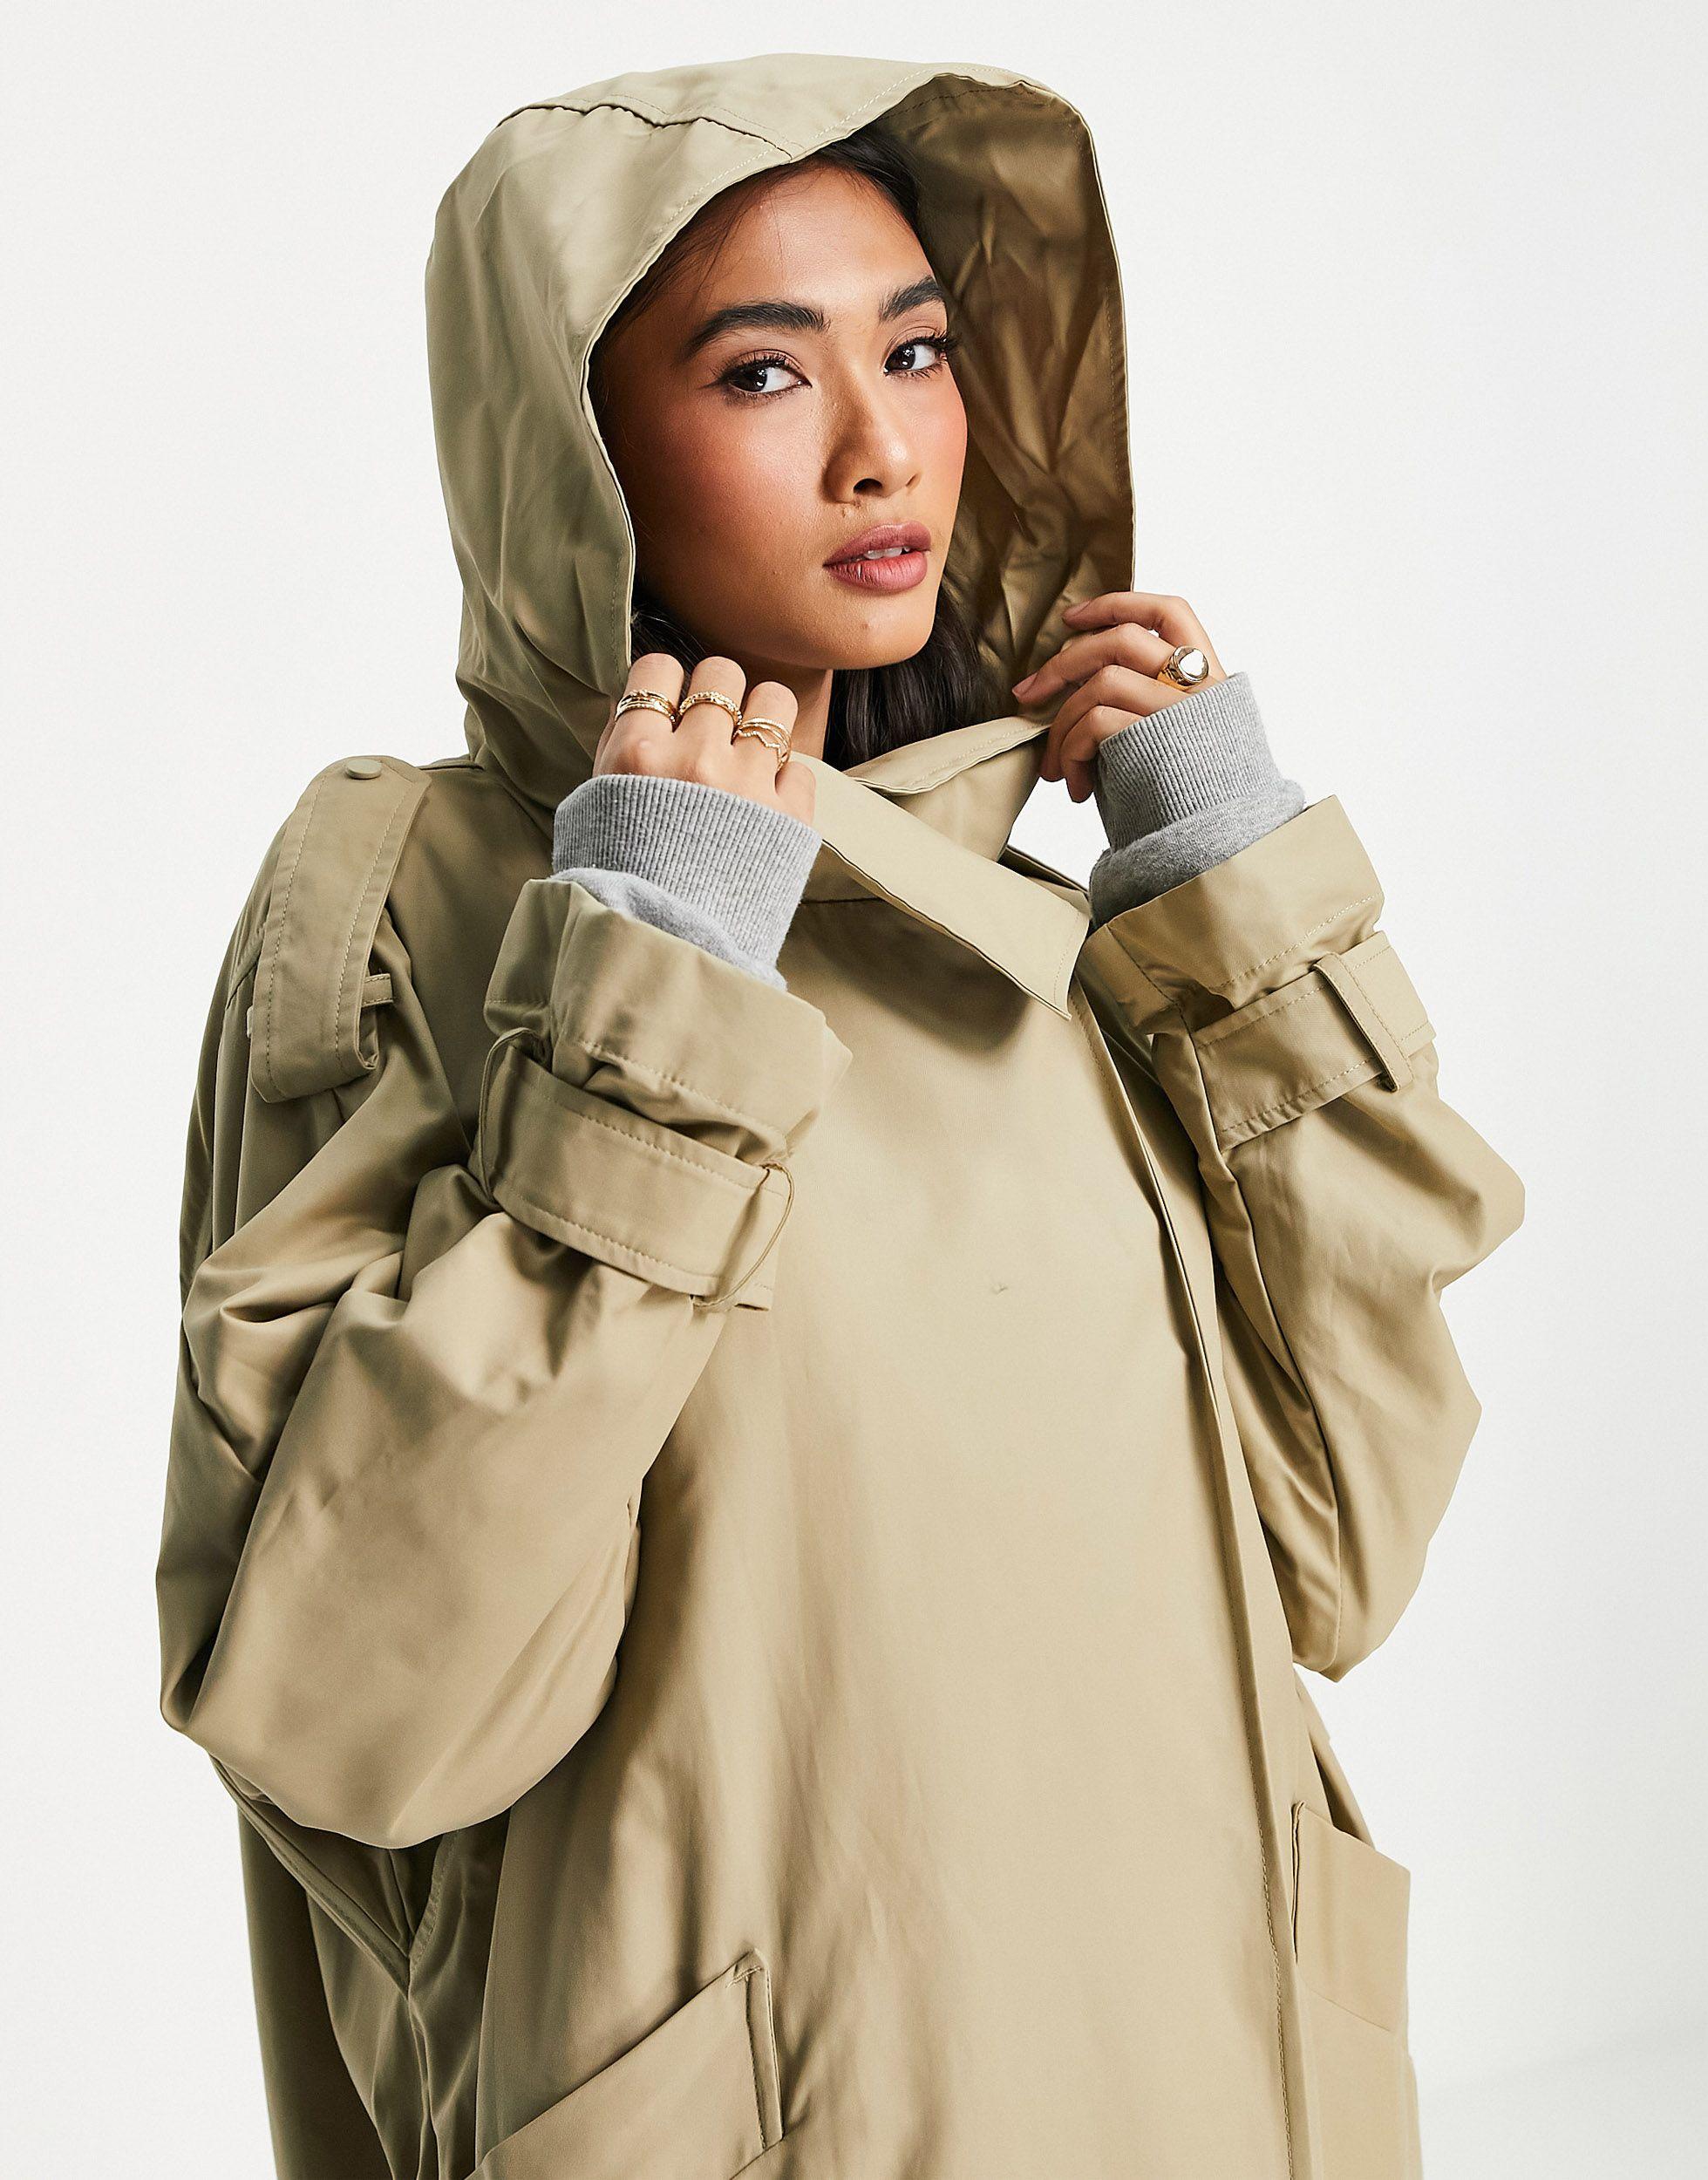 Mango Oversized Trench Coat With Hood in Natural | Lyst